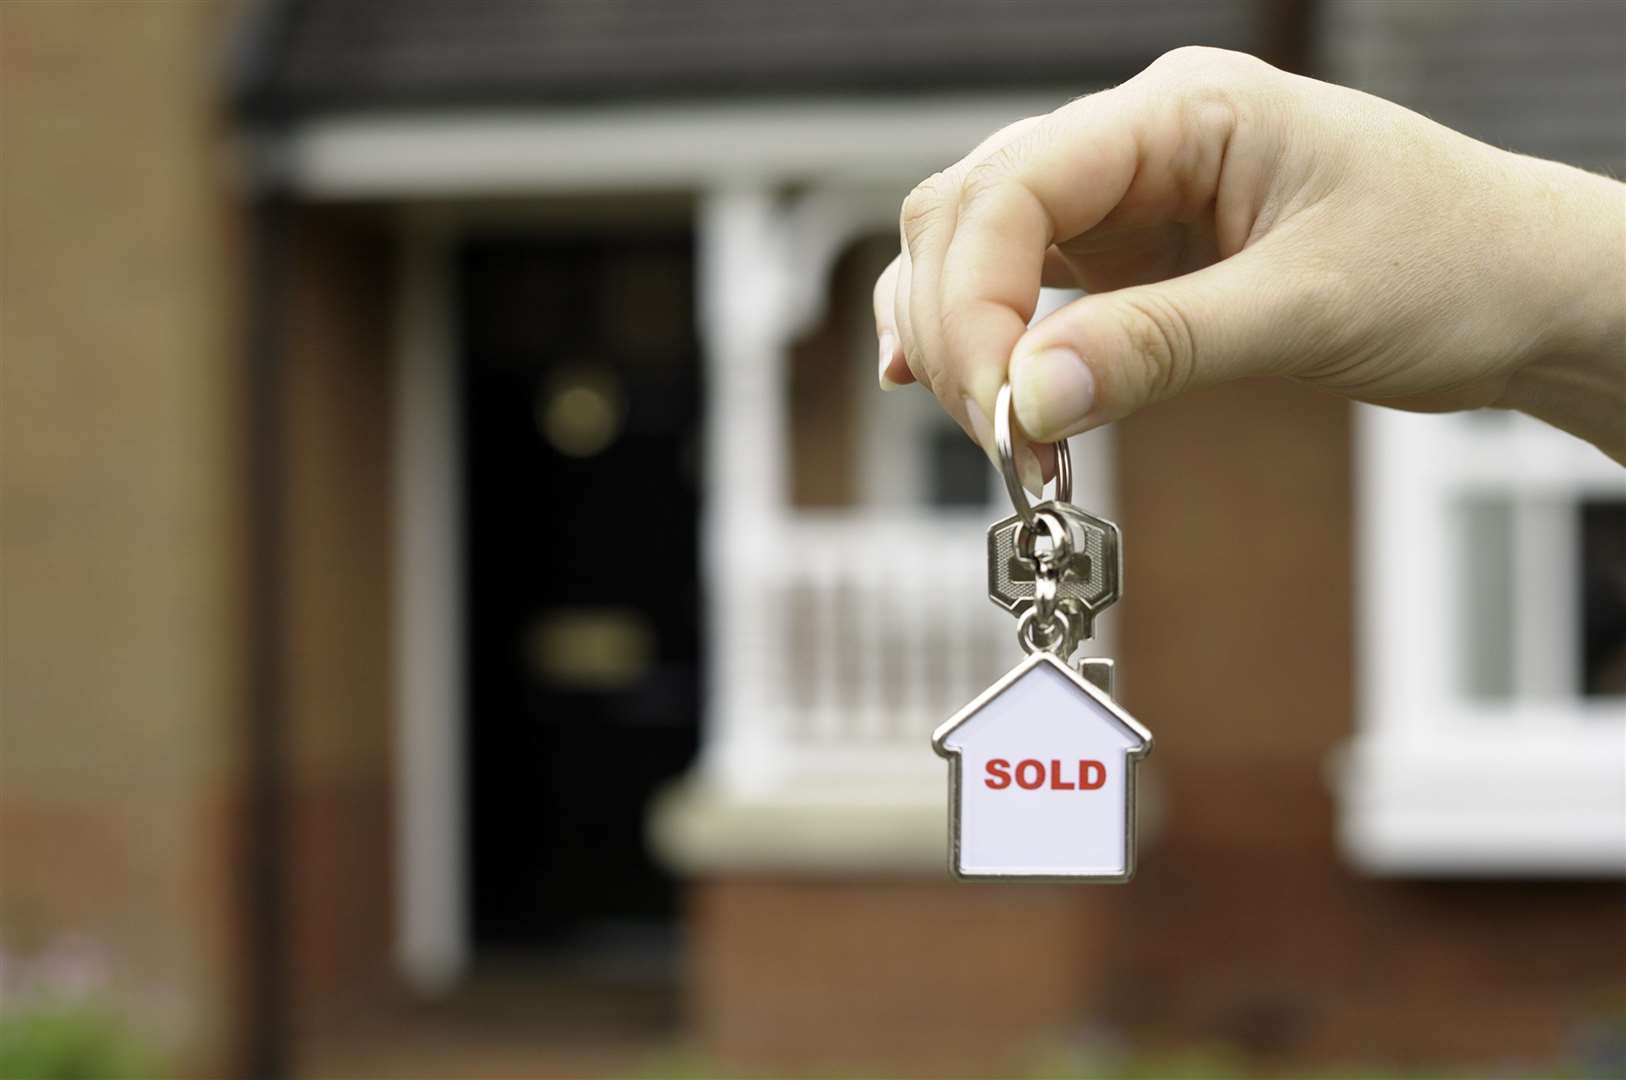 The estate agent has expanded its reach with its latest acquisitions